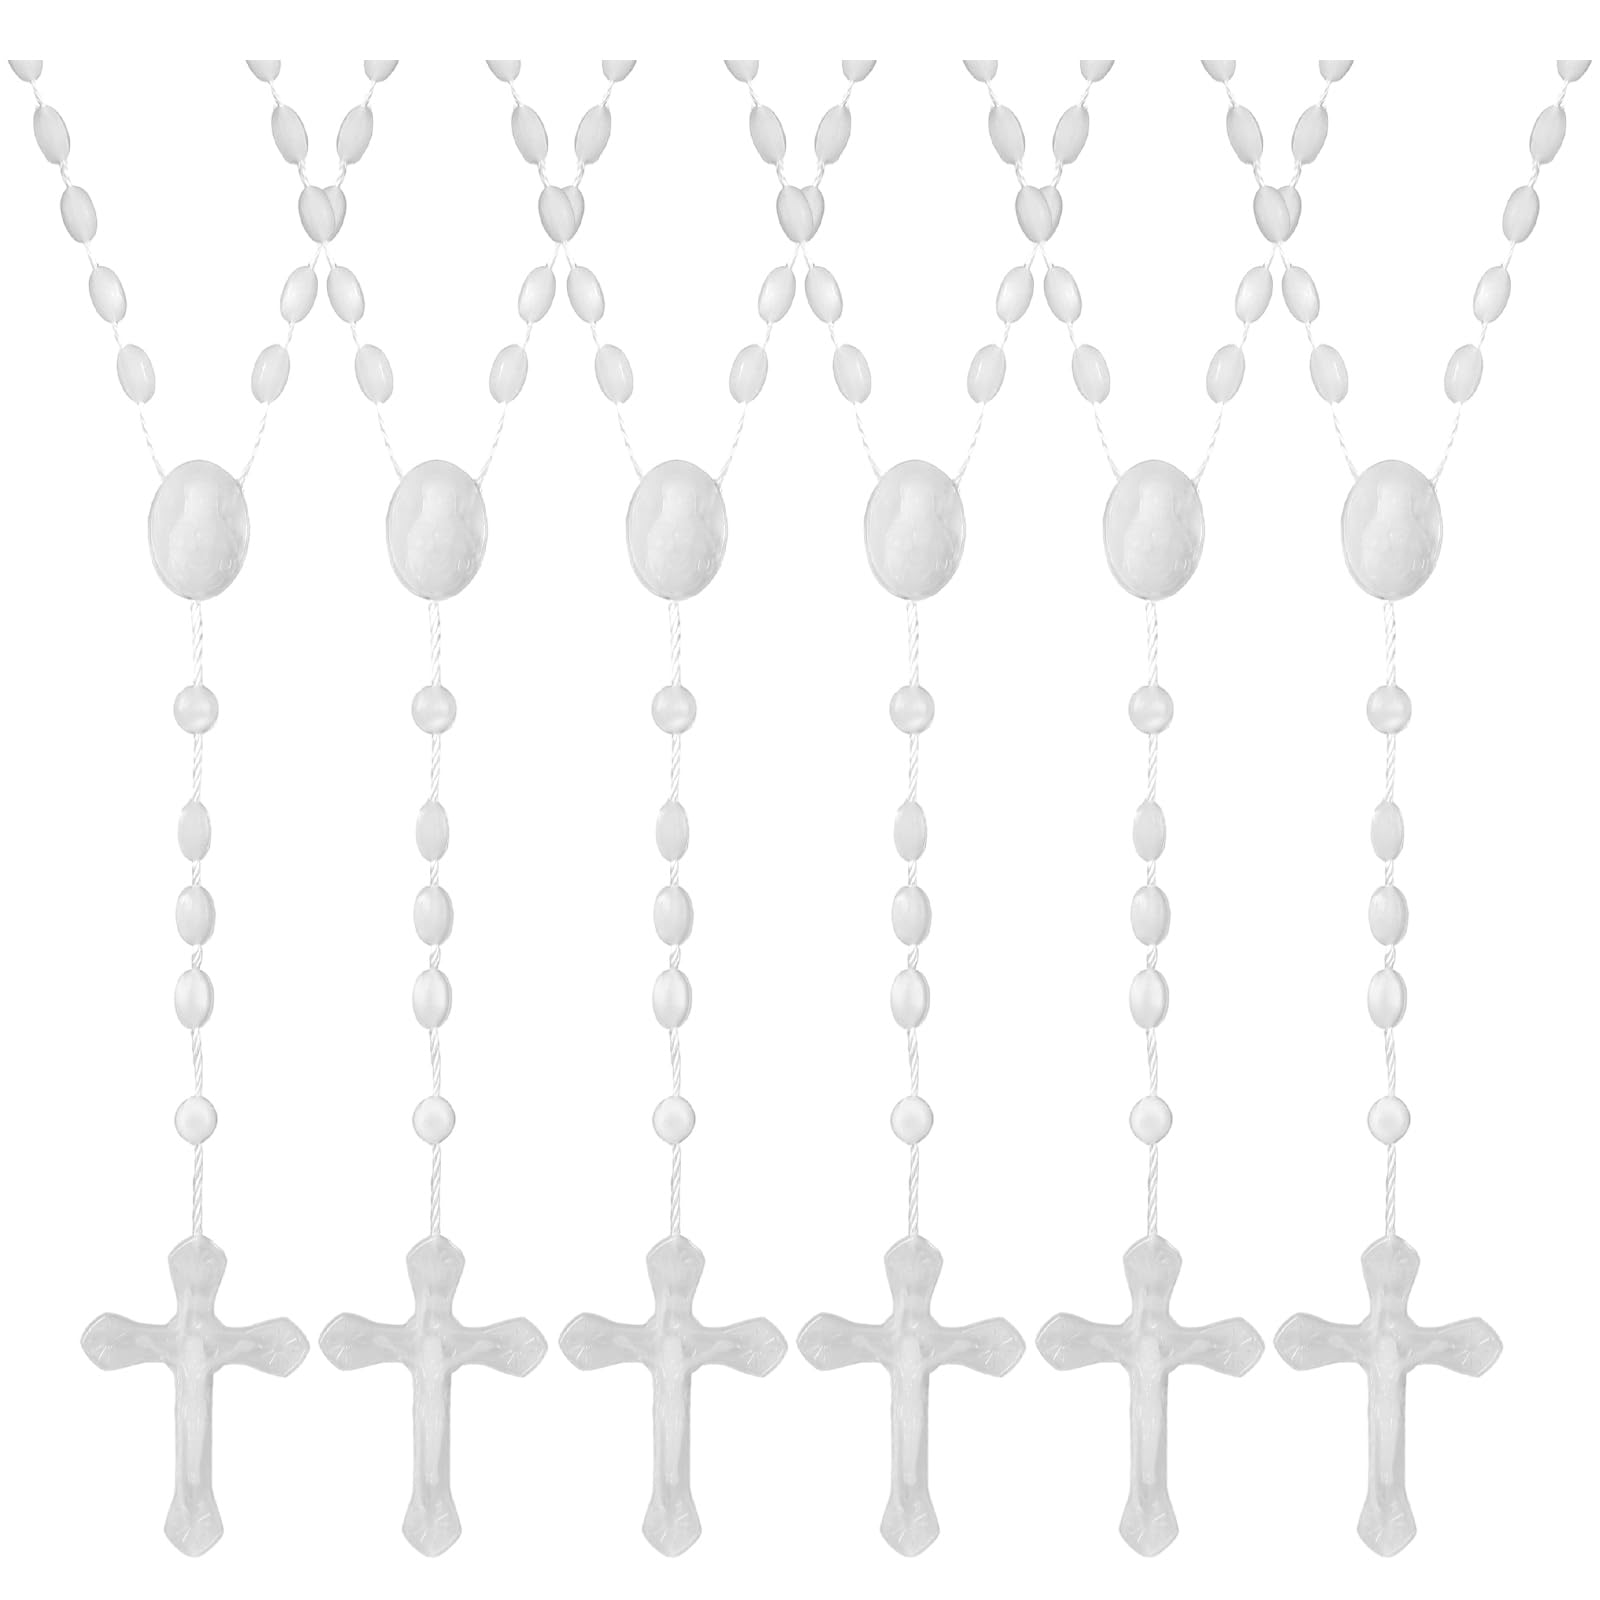 Beeveer 50 Pcs Glow in the Dark Plastic Rosary Beads Luminous in the Dark Rosary Necklaces Religious Plastic Rosary Cross Rosaries Catholic Crucifix Rosary Chains Pearlized Catholic Prayer Bead